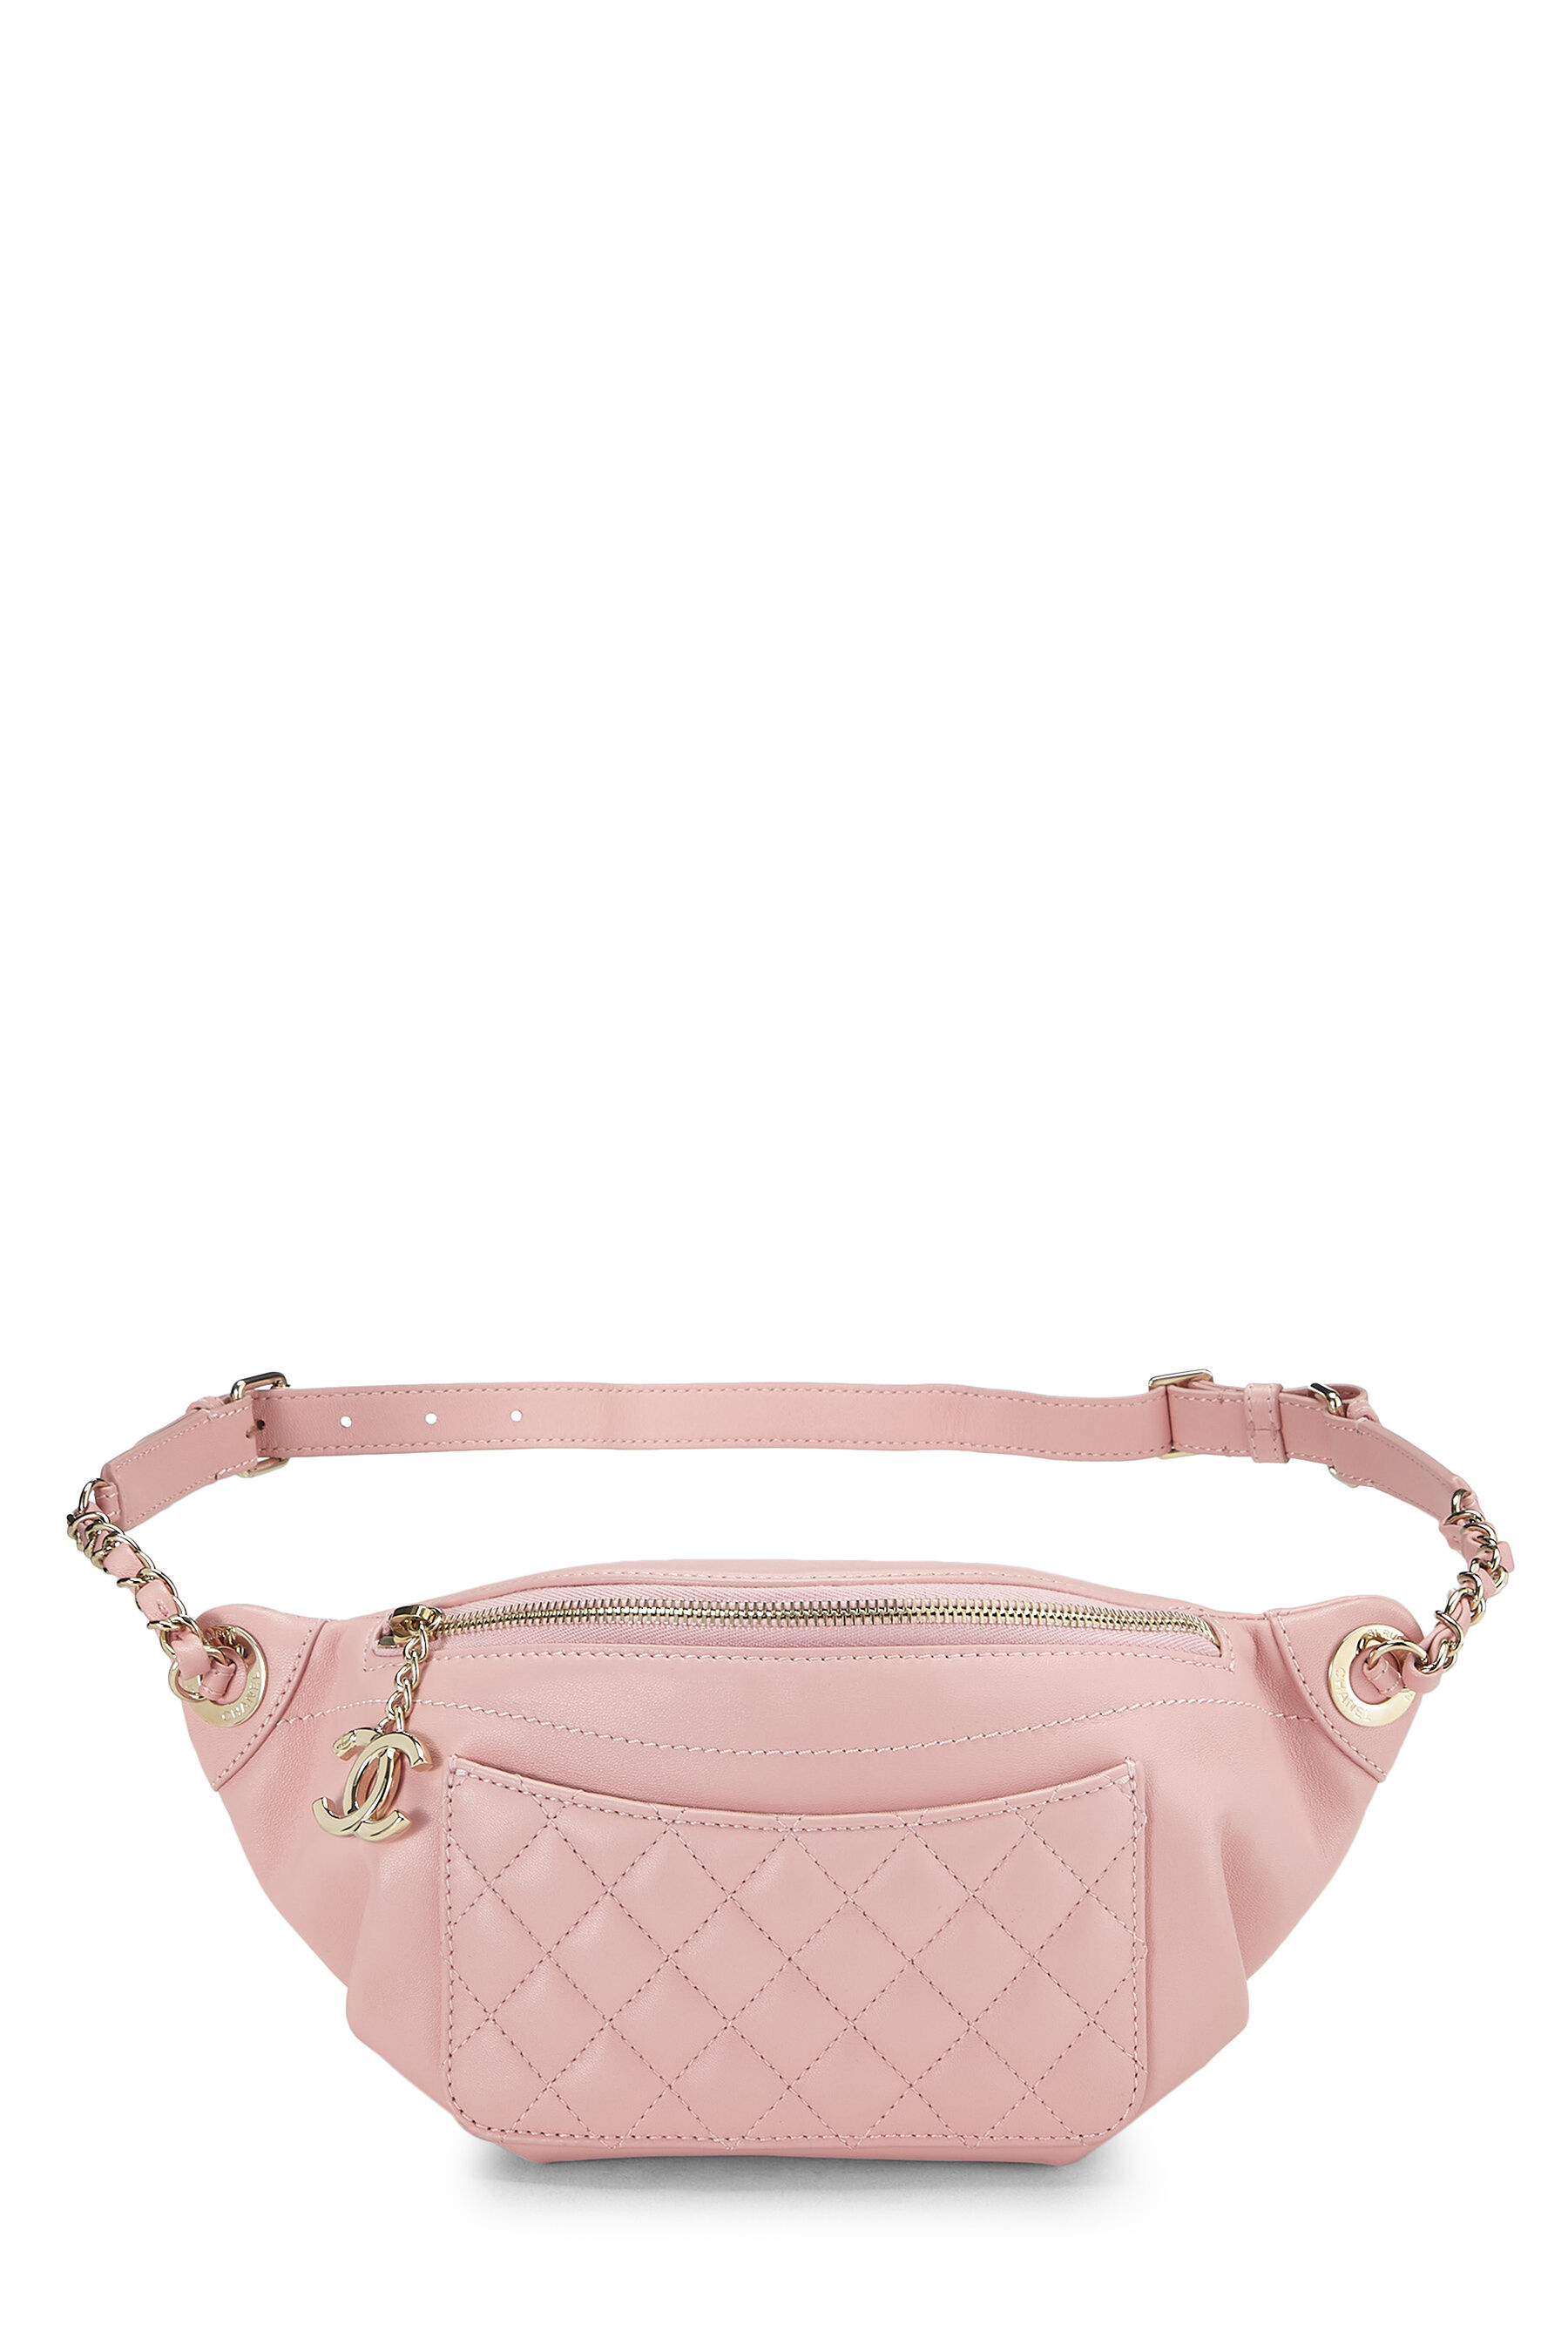 Chanel - Pink Quilted Lambskin Belt Bag